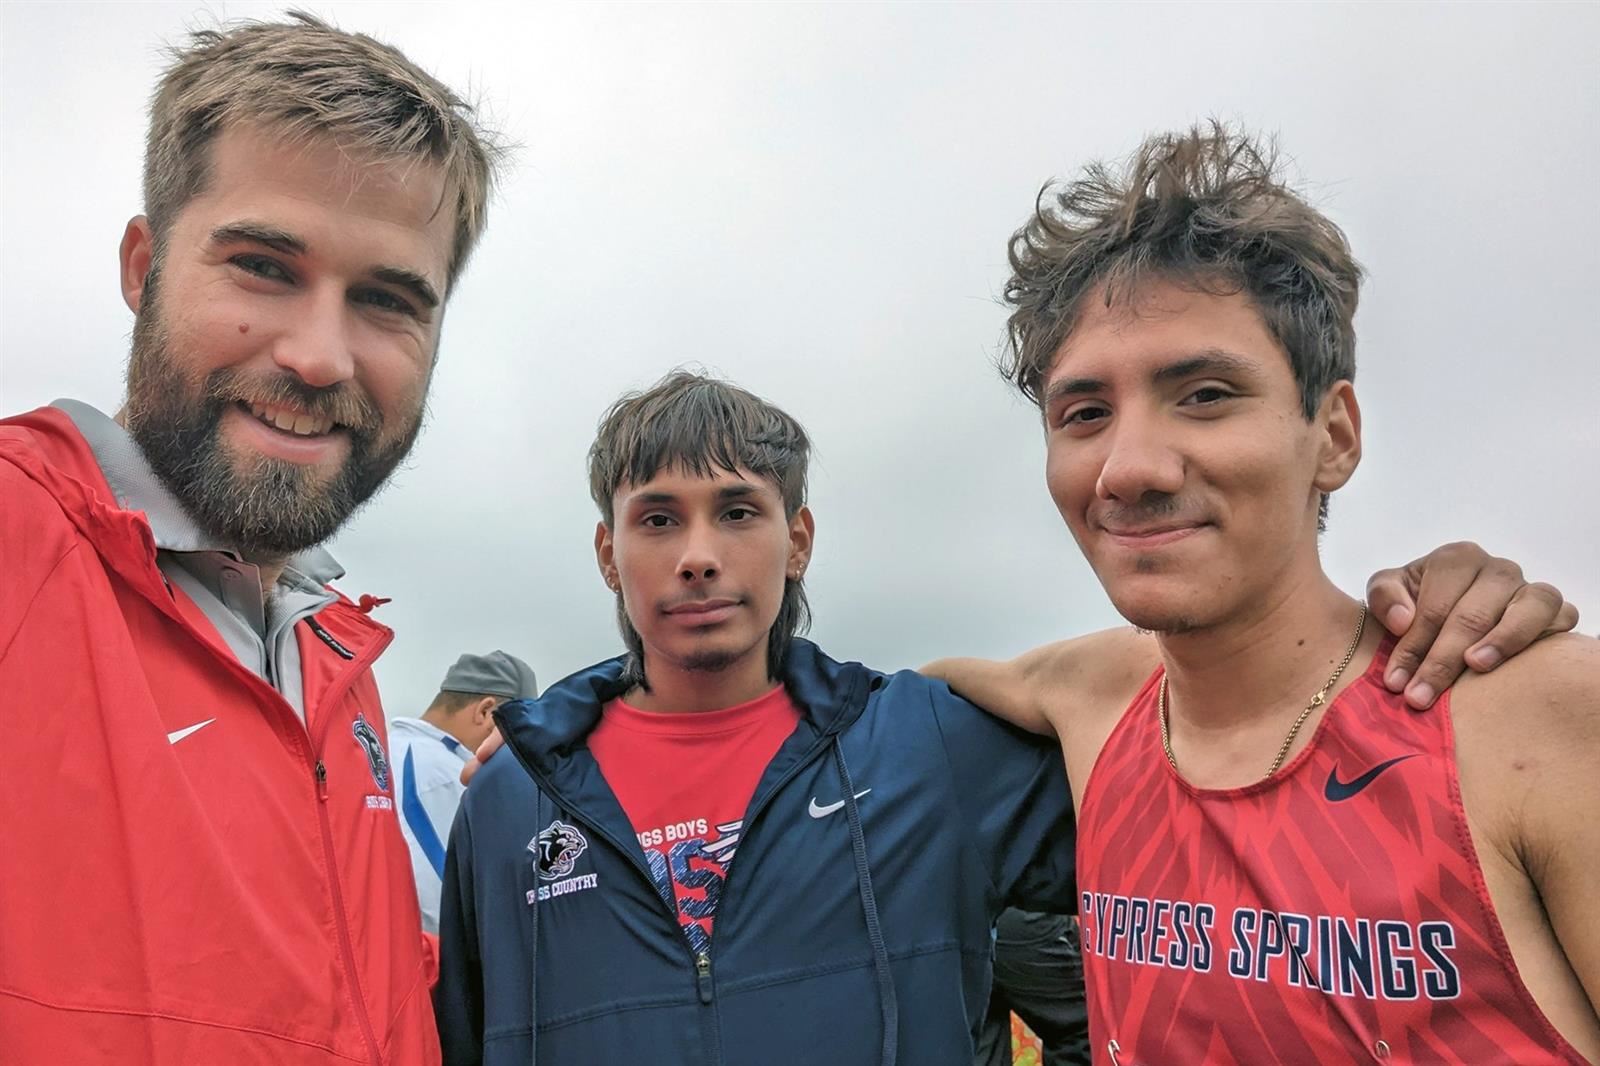 Cy Springs senior Manny Vela, right, placed 11th overall with a time of 15:20.40 at the UIL Cross Country State Championships